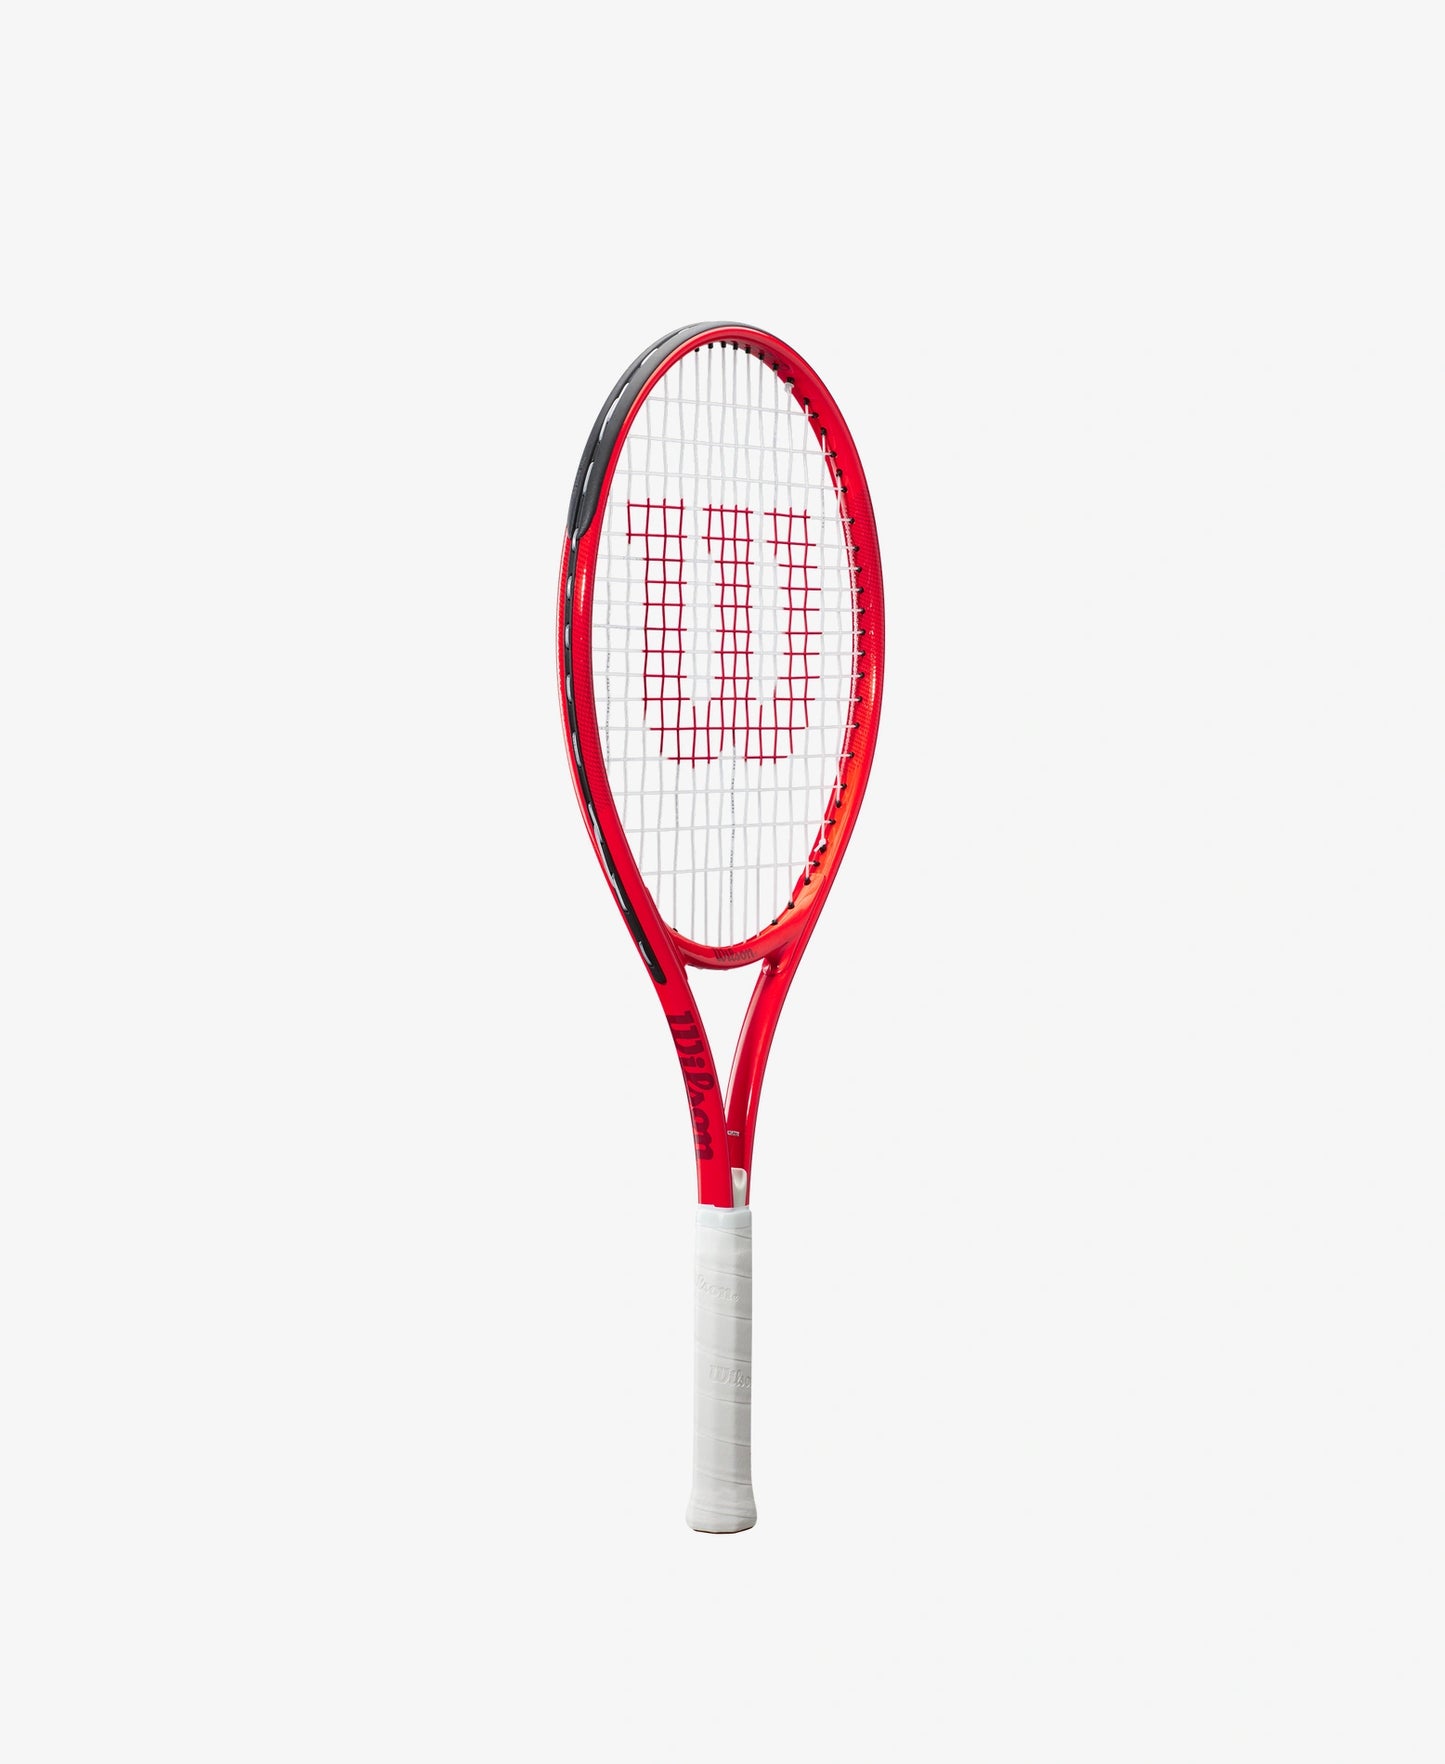 The Wilson Roger Federer 25 Tennis Racket available for sale at GSM Sports.   